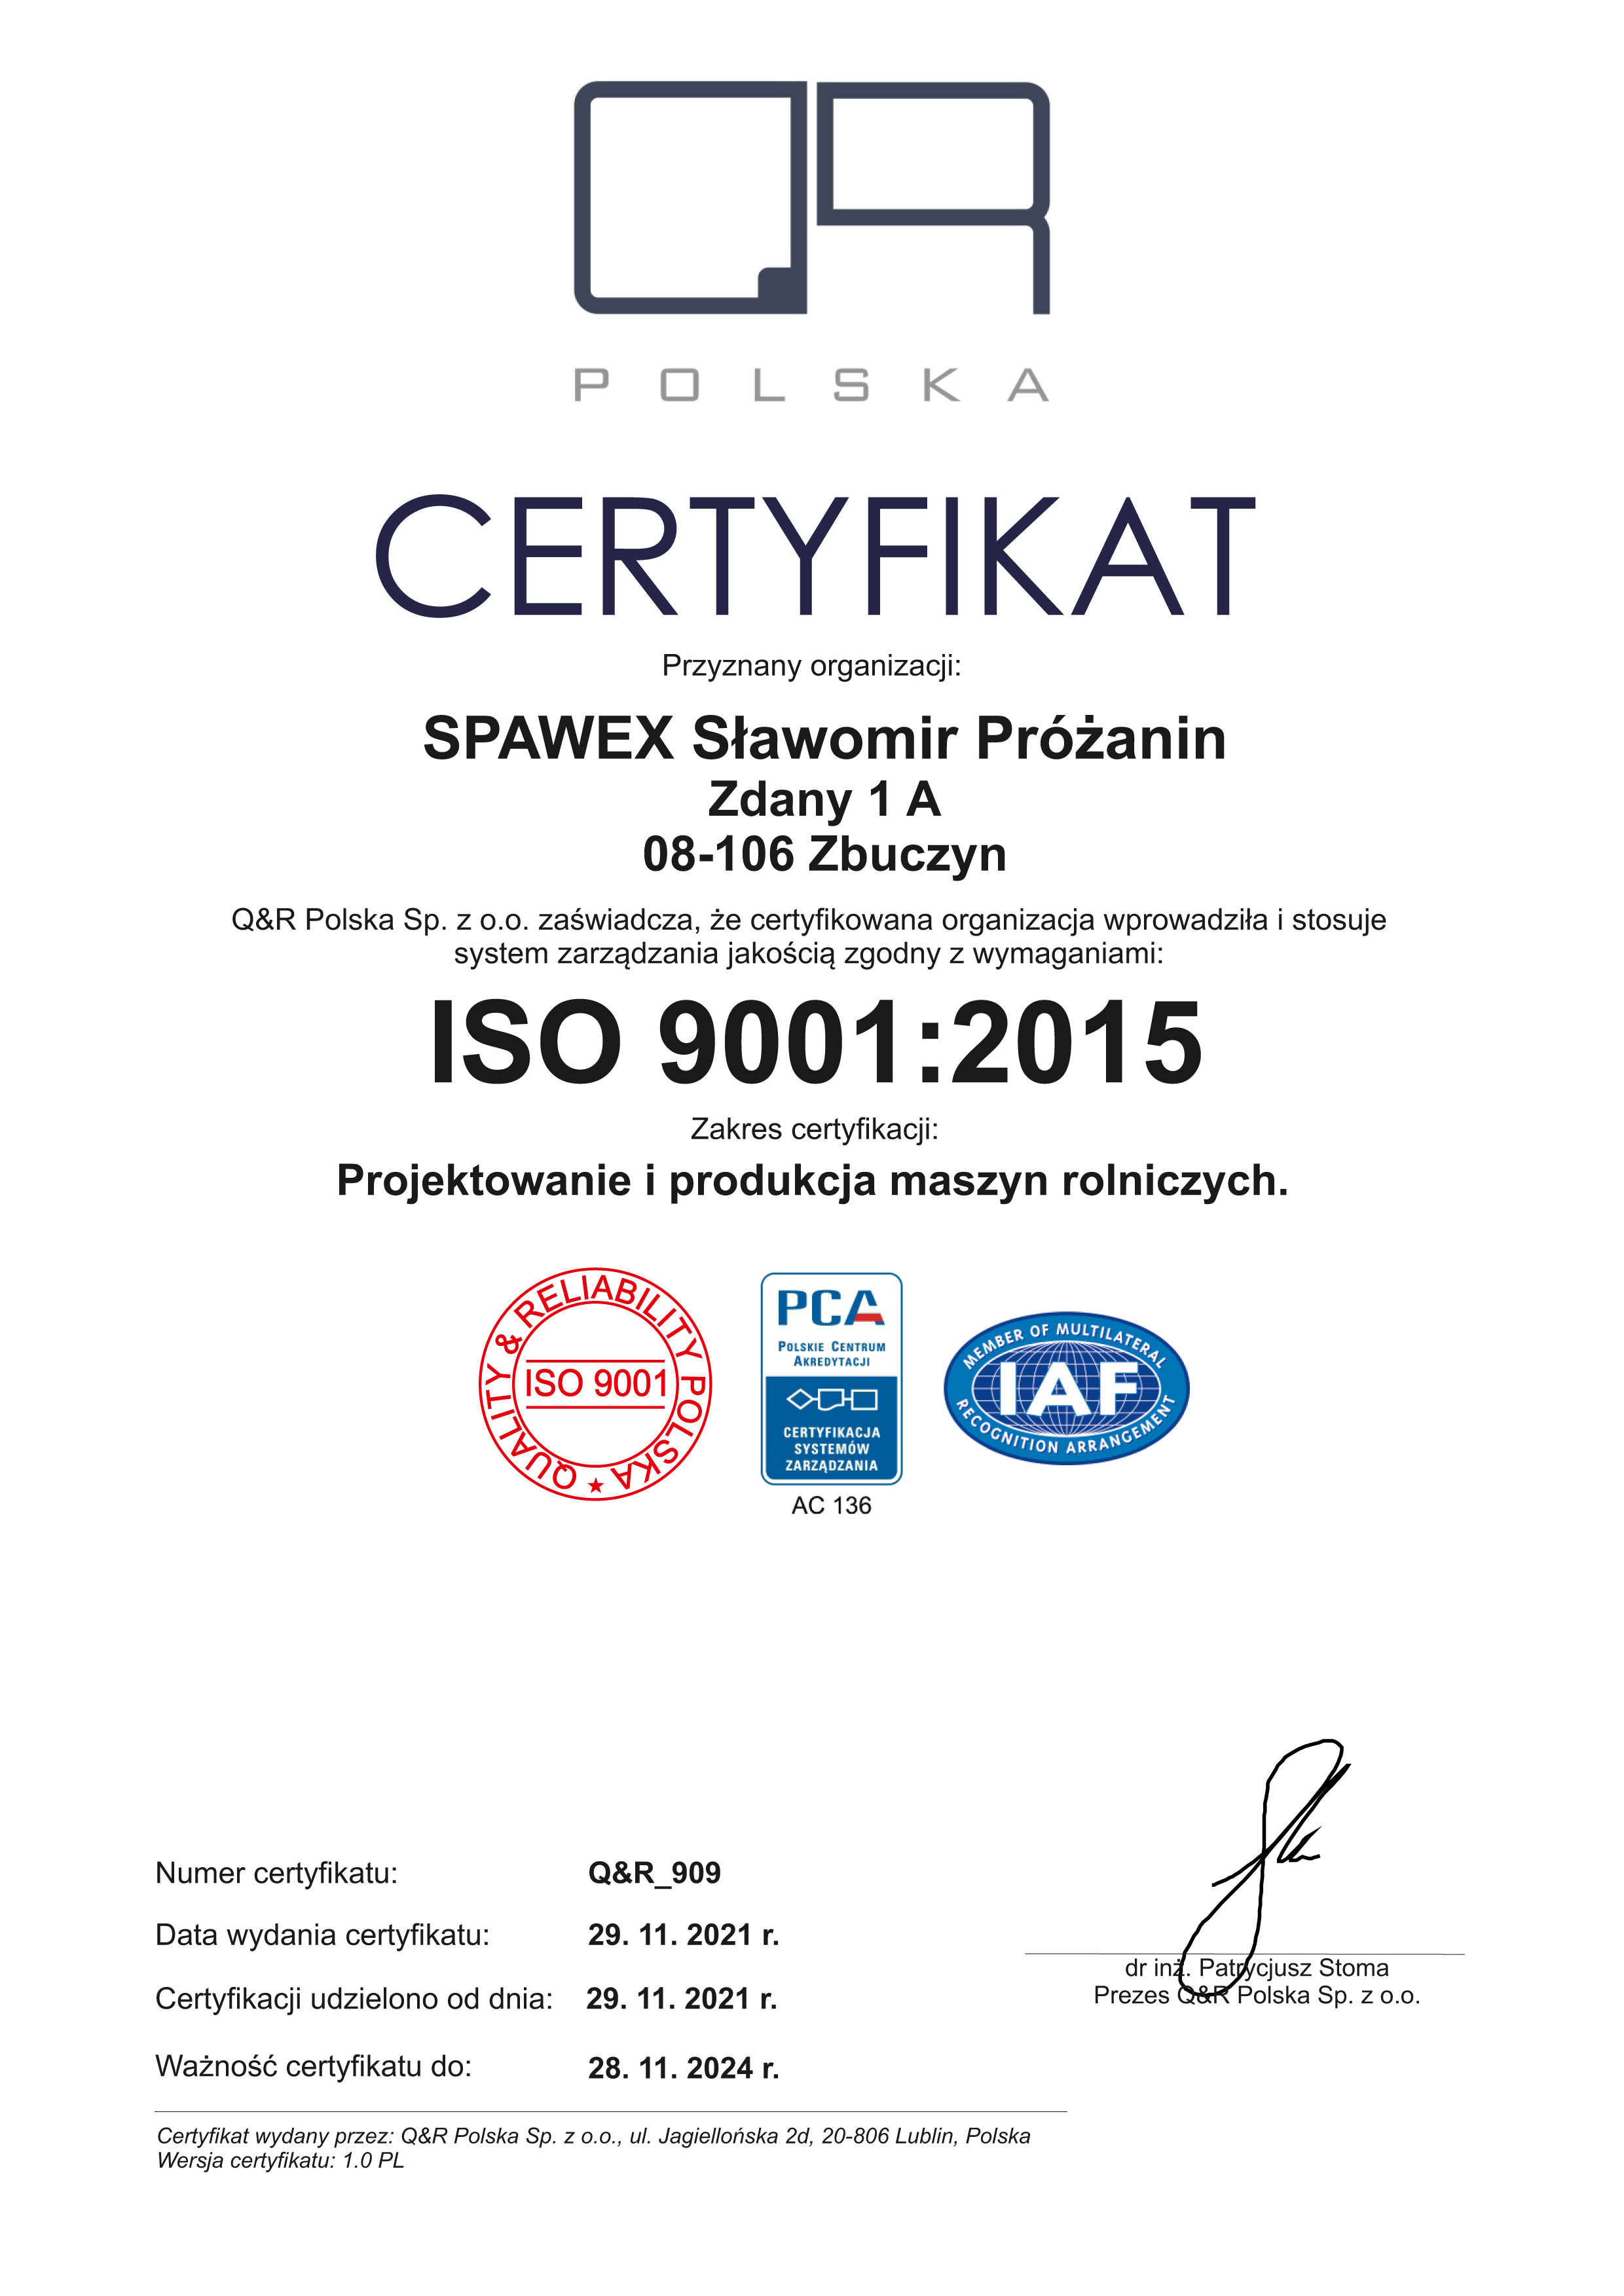 ISO 9001: 2015 in the scope of certification: Design and production of agricultural machinery.